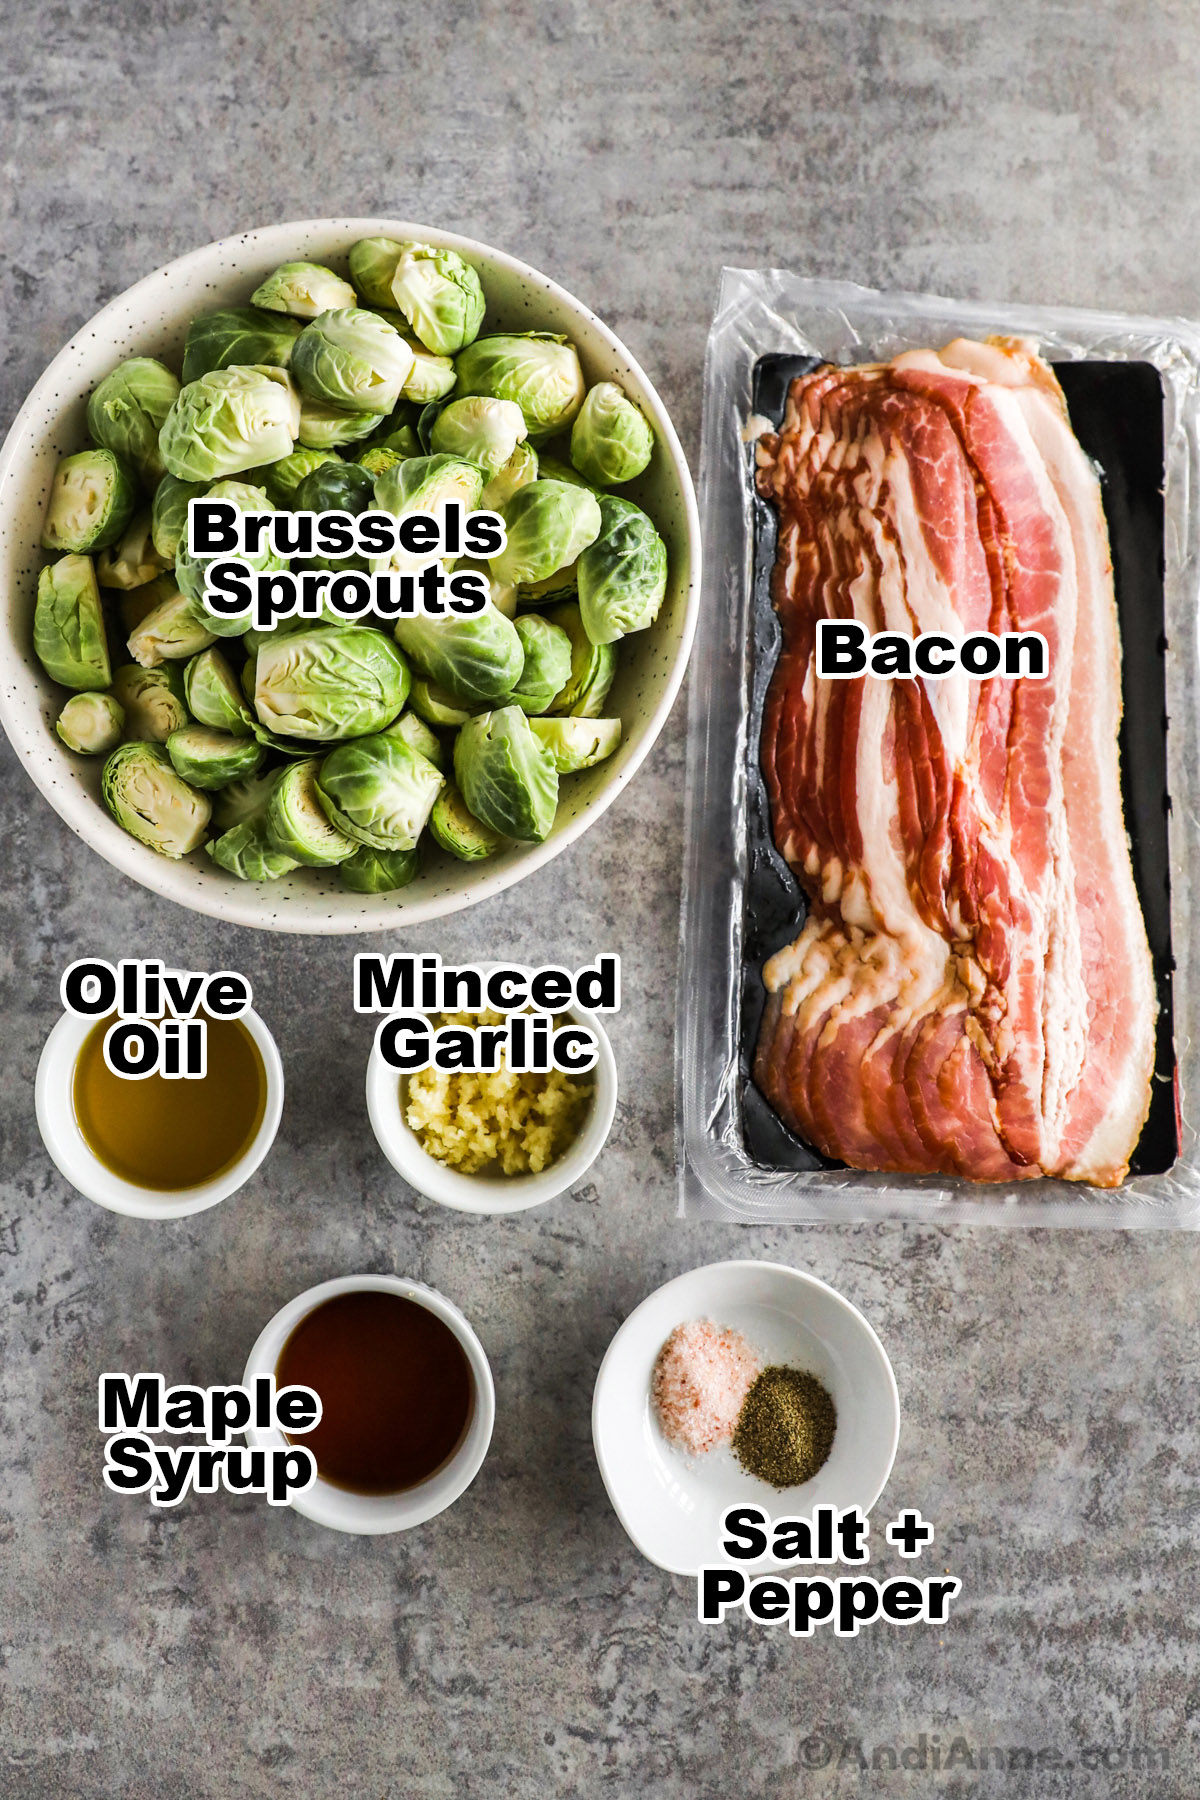 Recipe ingredients in bowls including bowls of brussels sprouts, olive oil, minced garlic, maple syrup, salt and pepper and raw bacon slices.